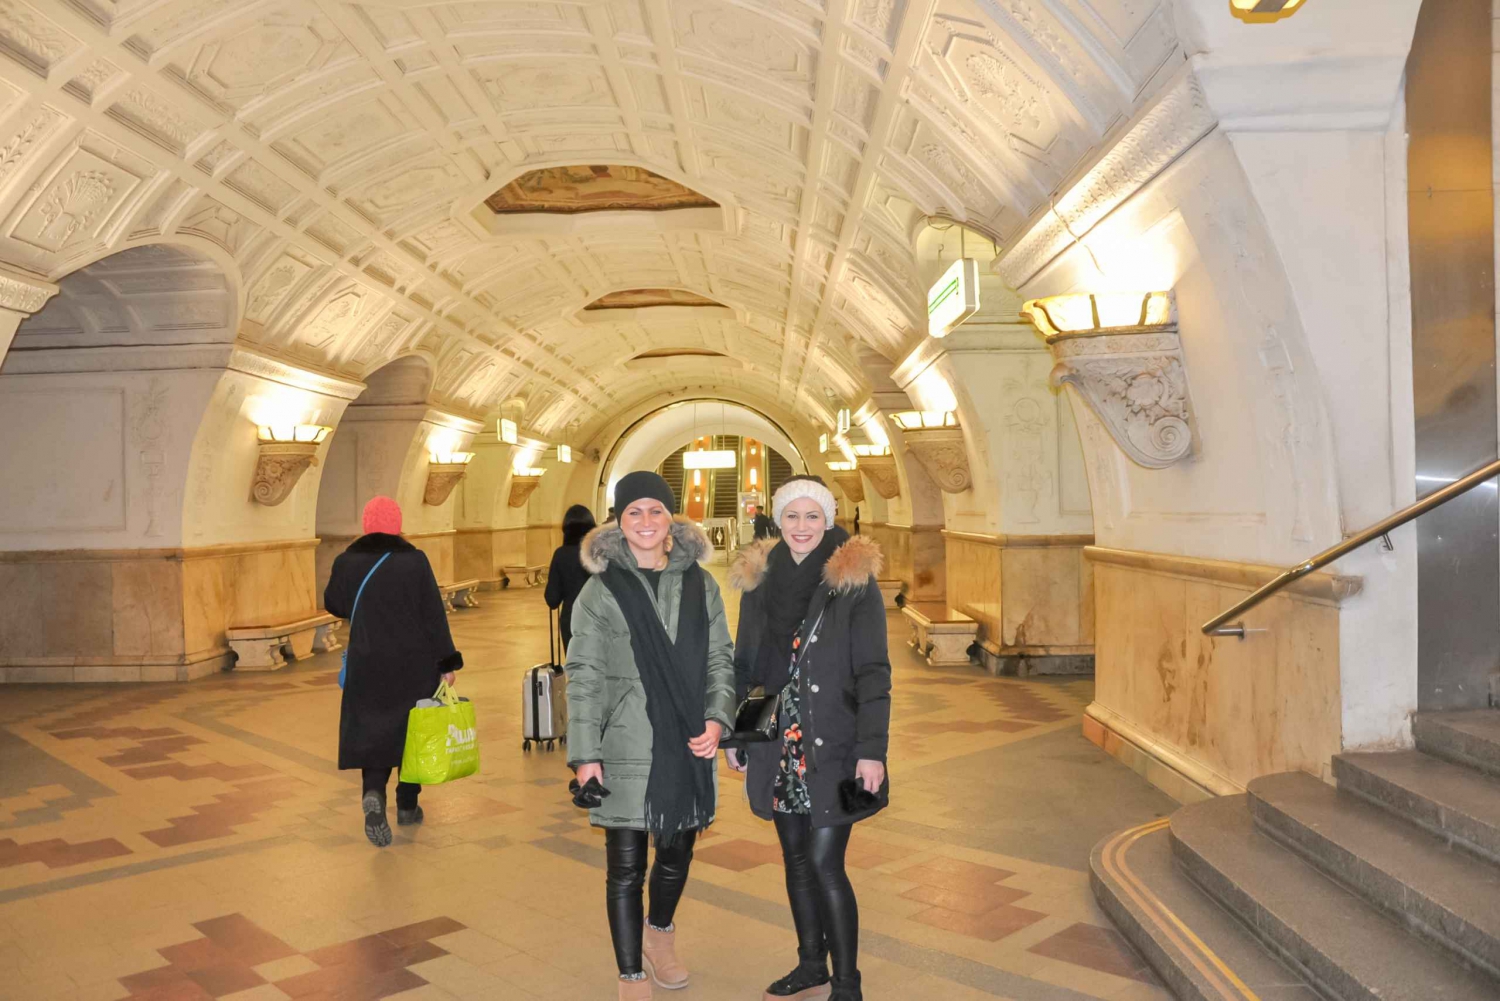 Moscow Metro Stations Private Tour with Hotel Pickup